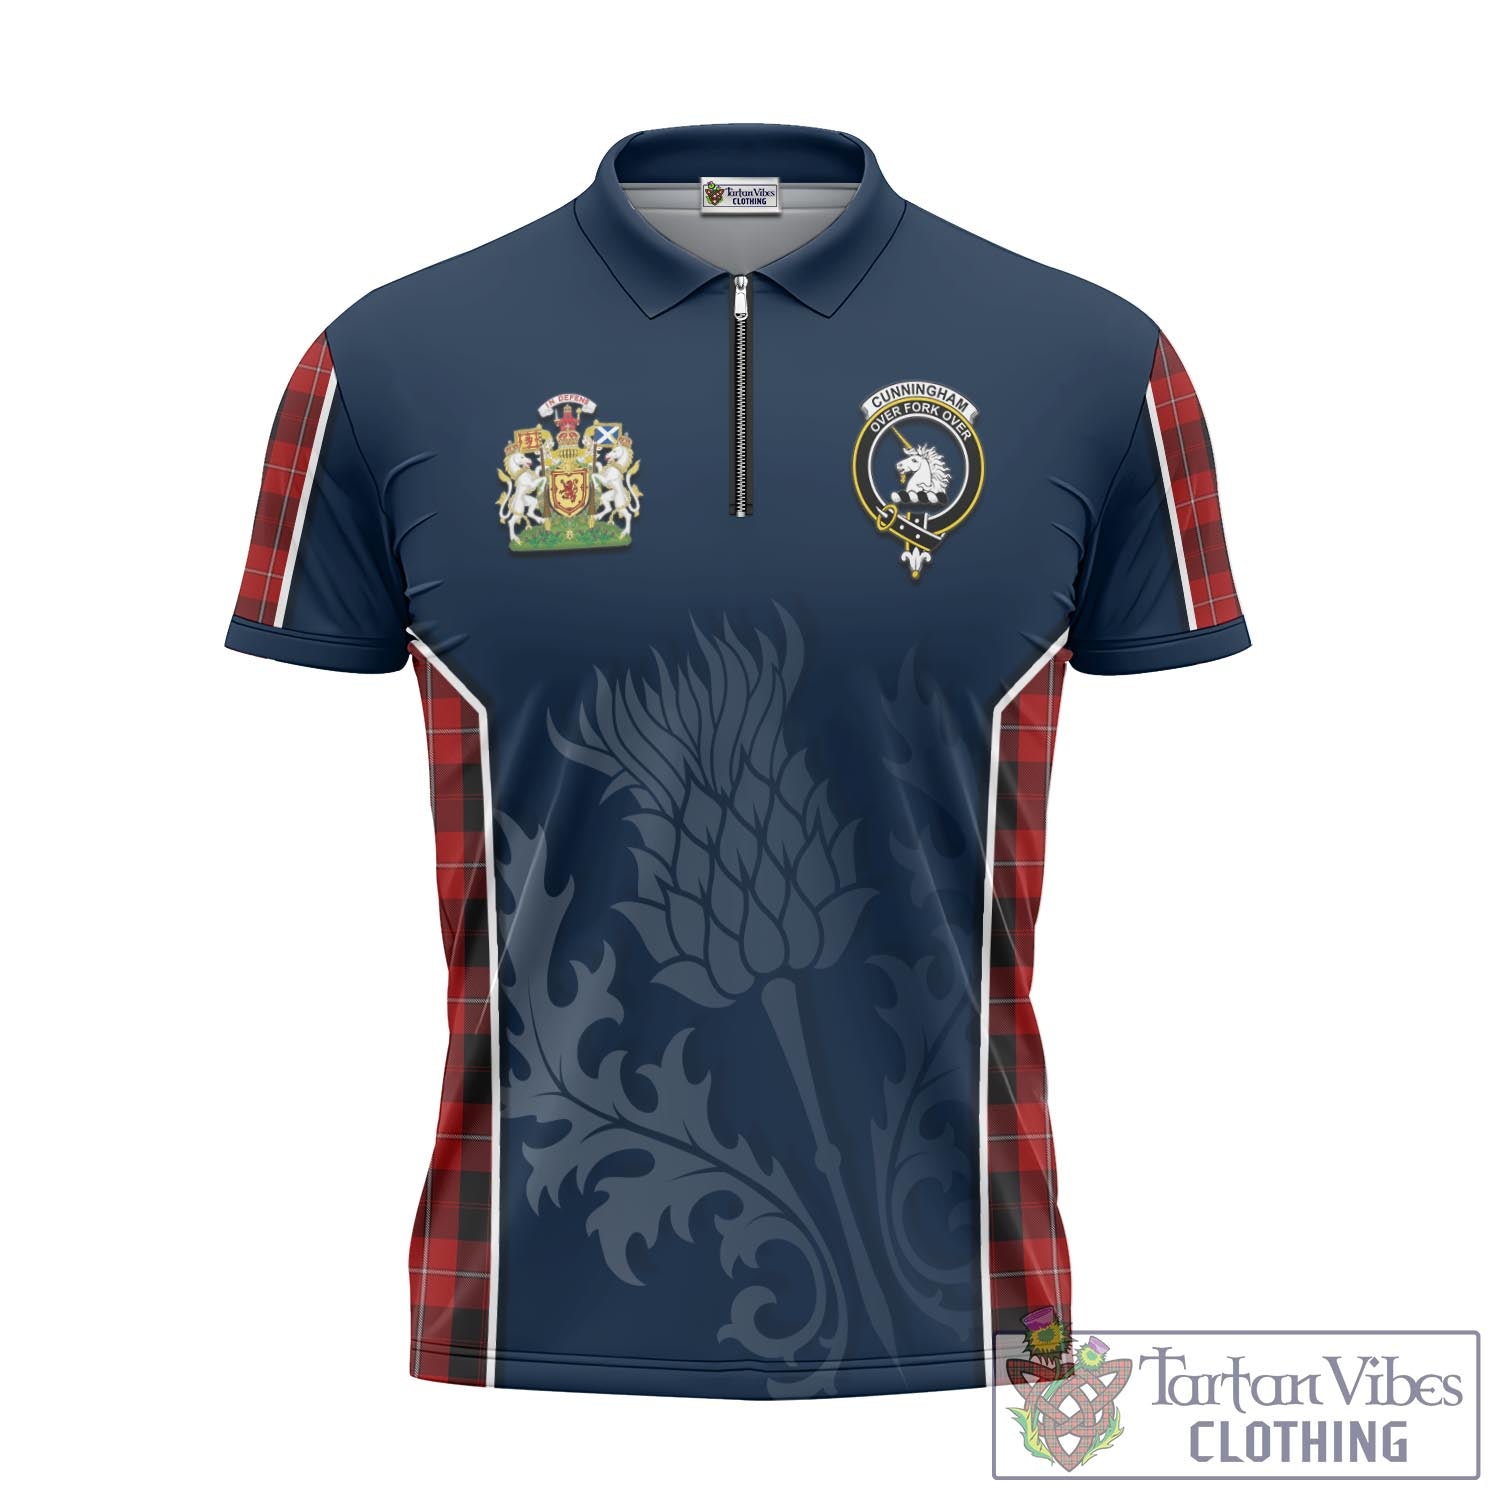 Tartan Vibes Clothing Cunningham Tartan Zipper Polo Shirt with Family Crest and Scottish Thistle Vibes Sport Style